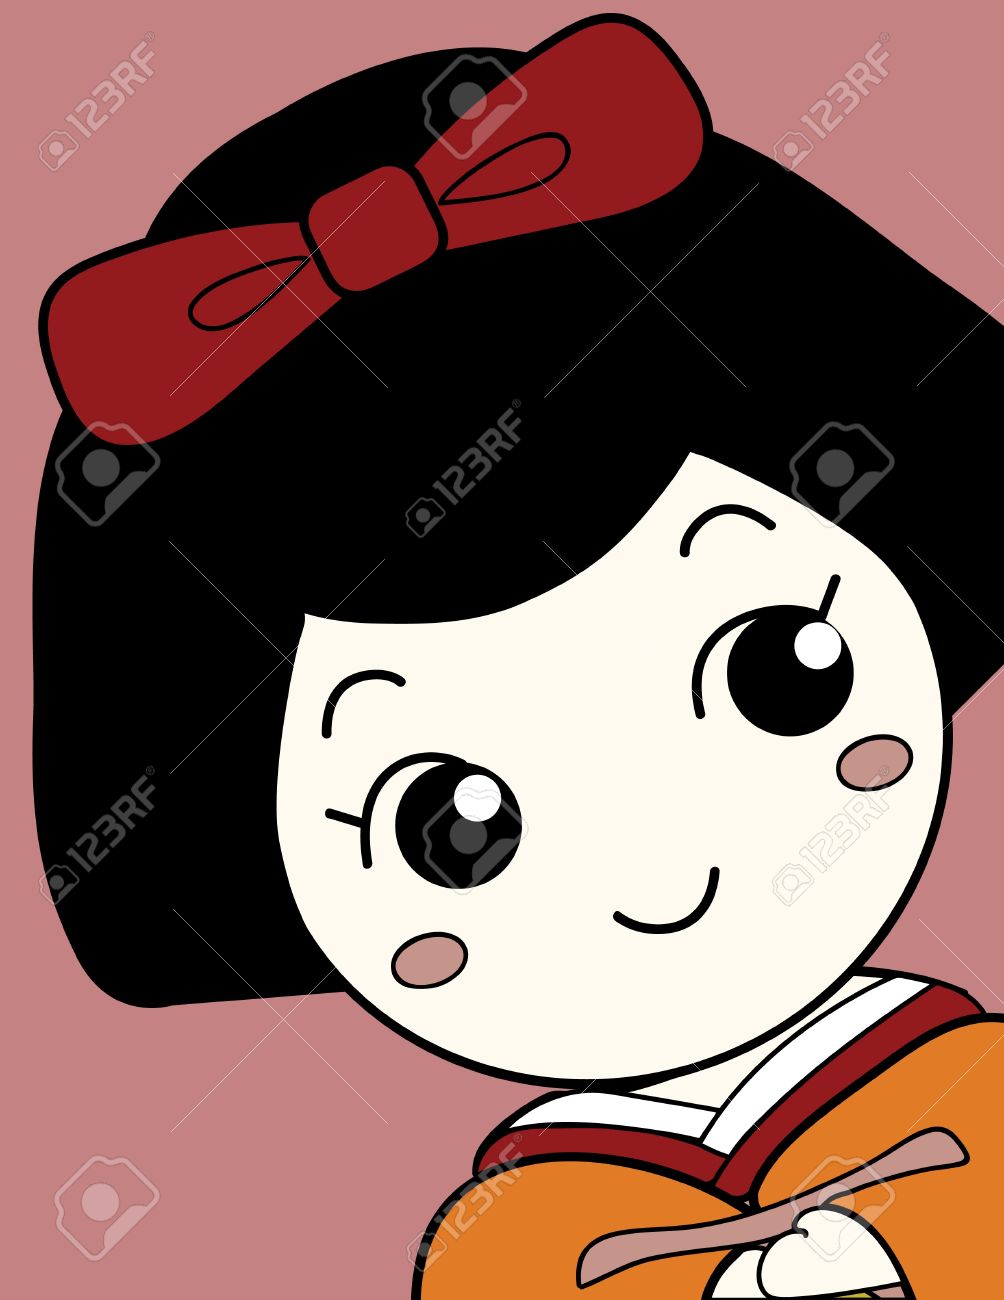 Cute Japanese Cartoon Characters Clipart | Free download ...